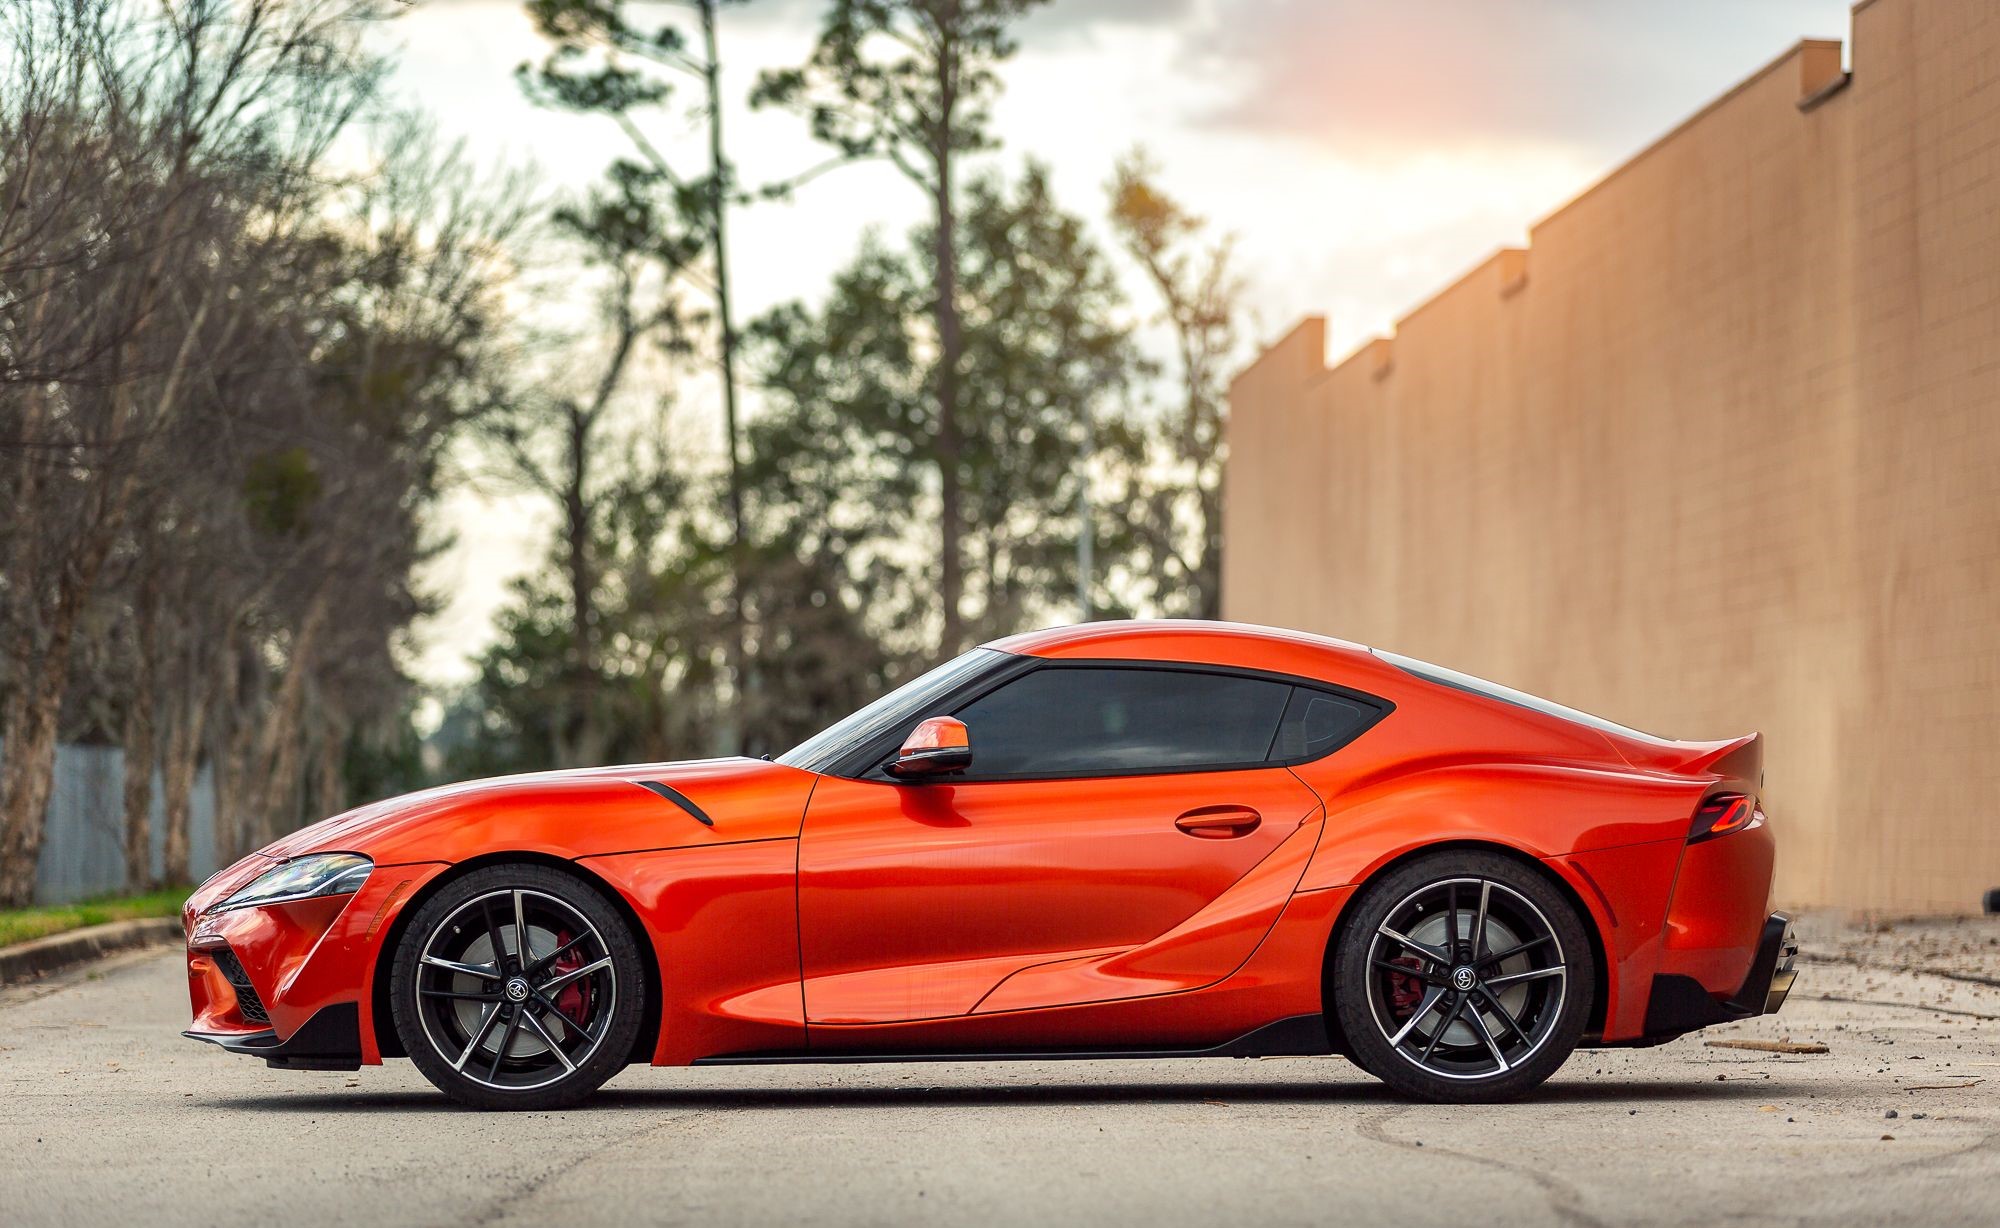 Toyota Supra car model wrapped in a glossy firey orange colored vinyl car wrap. Super glossy "Firey Orange" Toyota Supra wrapped by Jacksonville Florida's vinyl car wrap pros at <a href="http://www.wrapsdirect.com">Wraps Direct</a>.